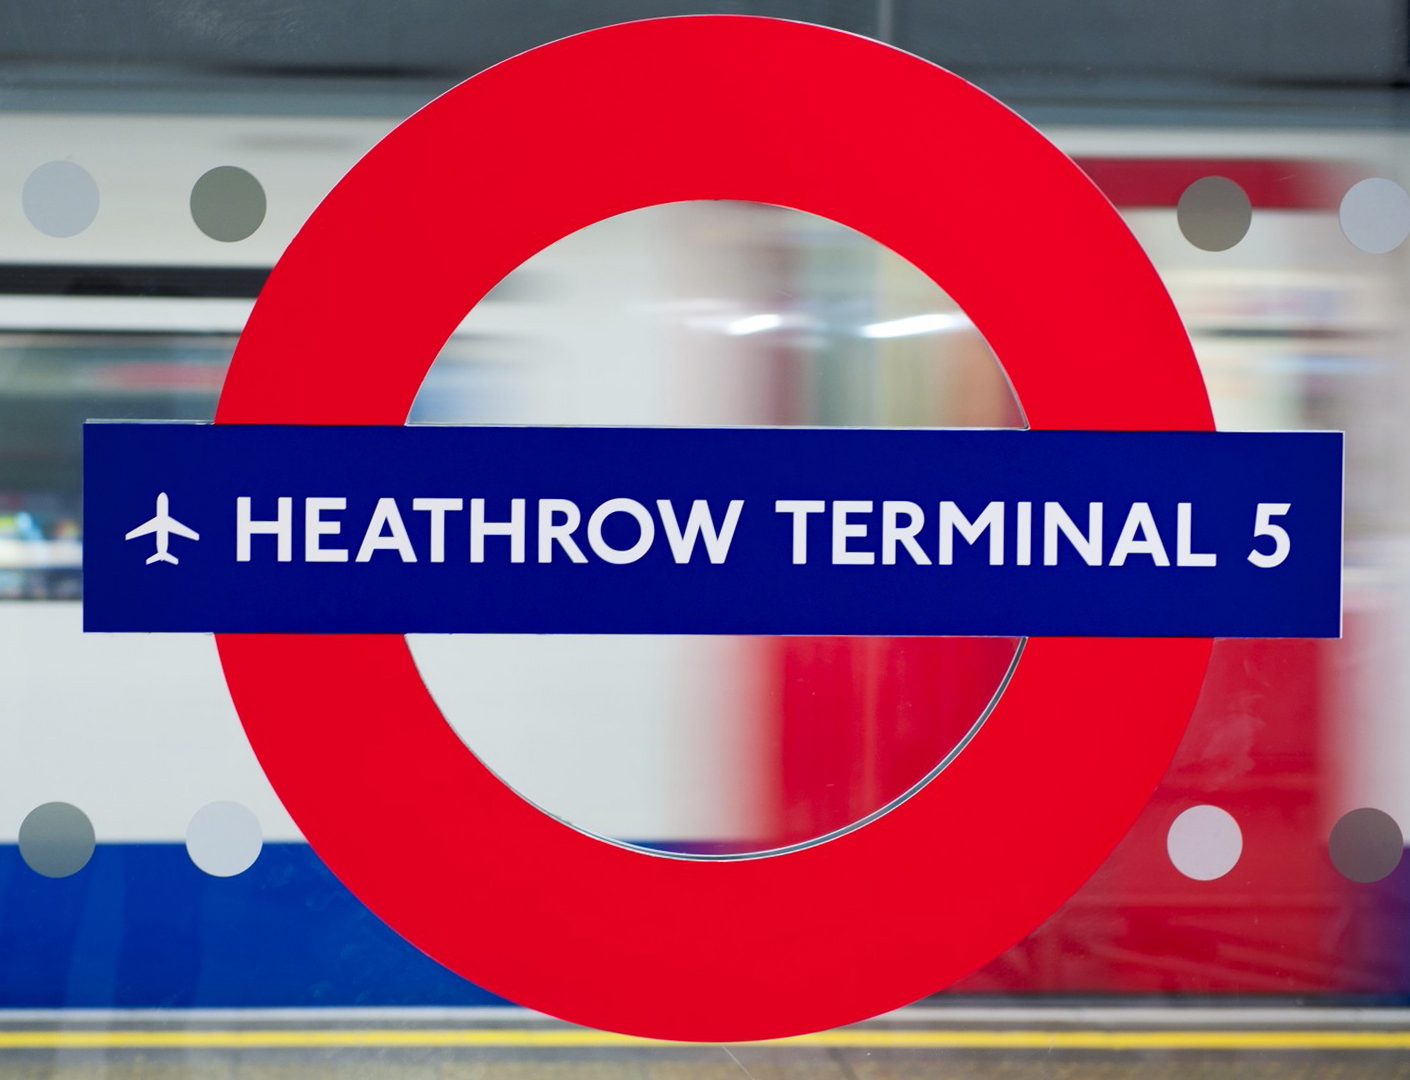 London Heathrow, Transport for London (TfL) and the Department for Transport have agreed to boost integrated rail connectivity to the airport, including the addition of two new Elizabeth line trains per hour serving Terminal 5 from December 2019